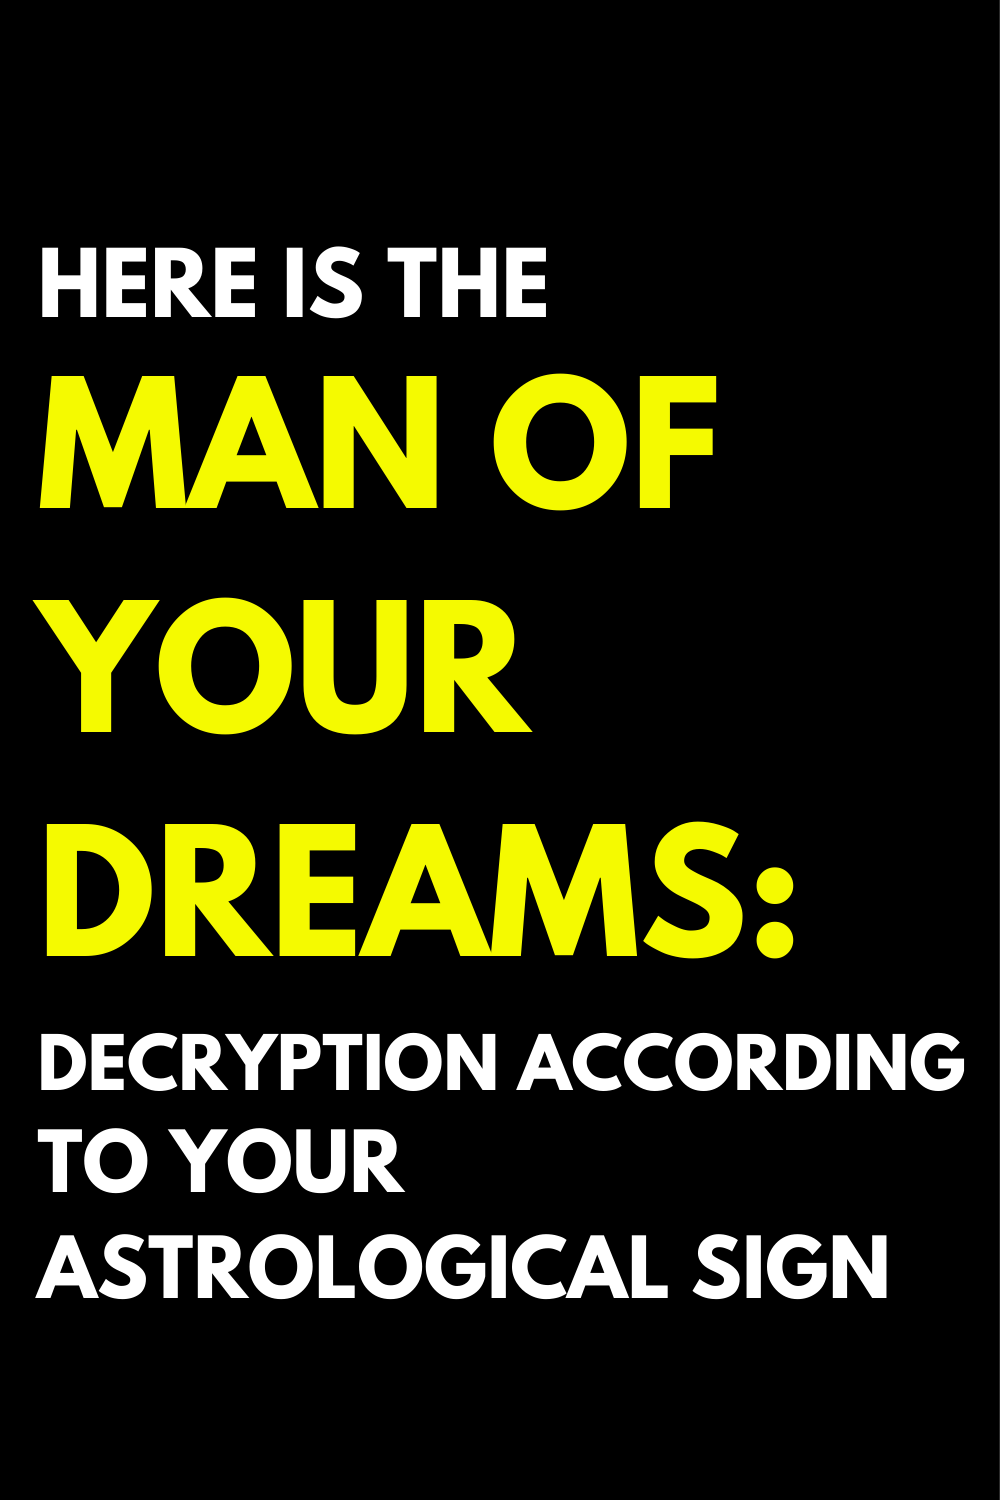 Here is the Man of Your Dreams: Decryption According to Your Astrological Sign